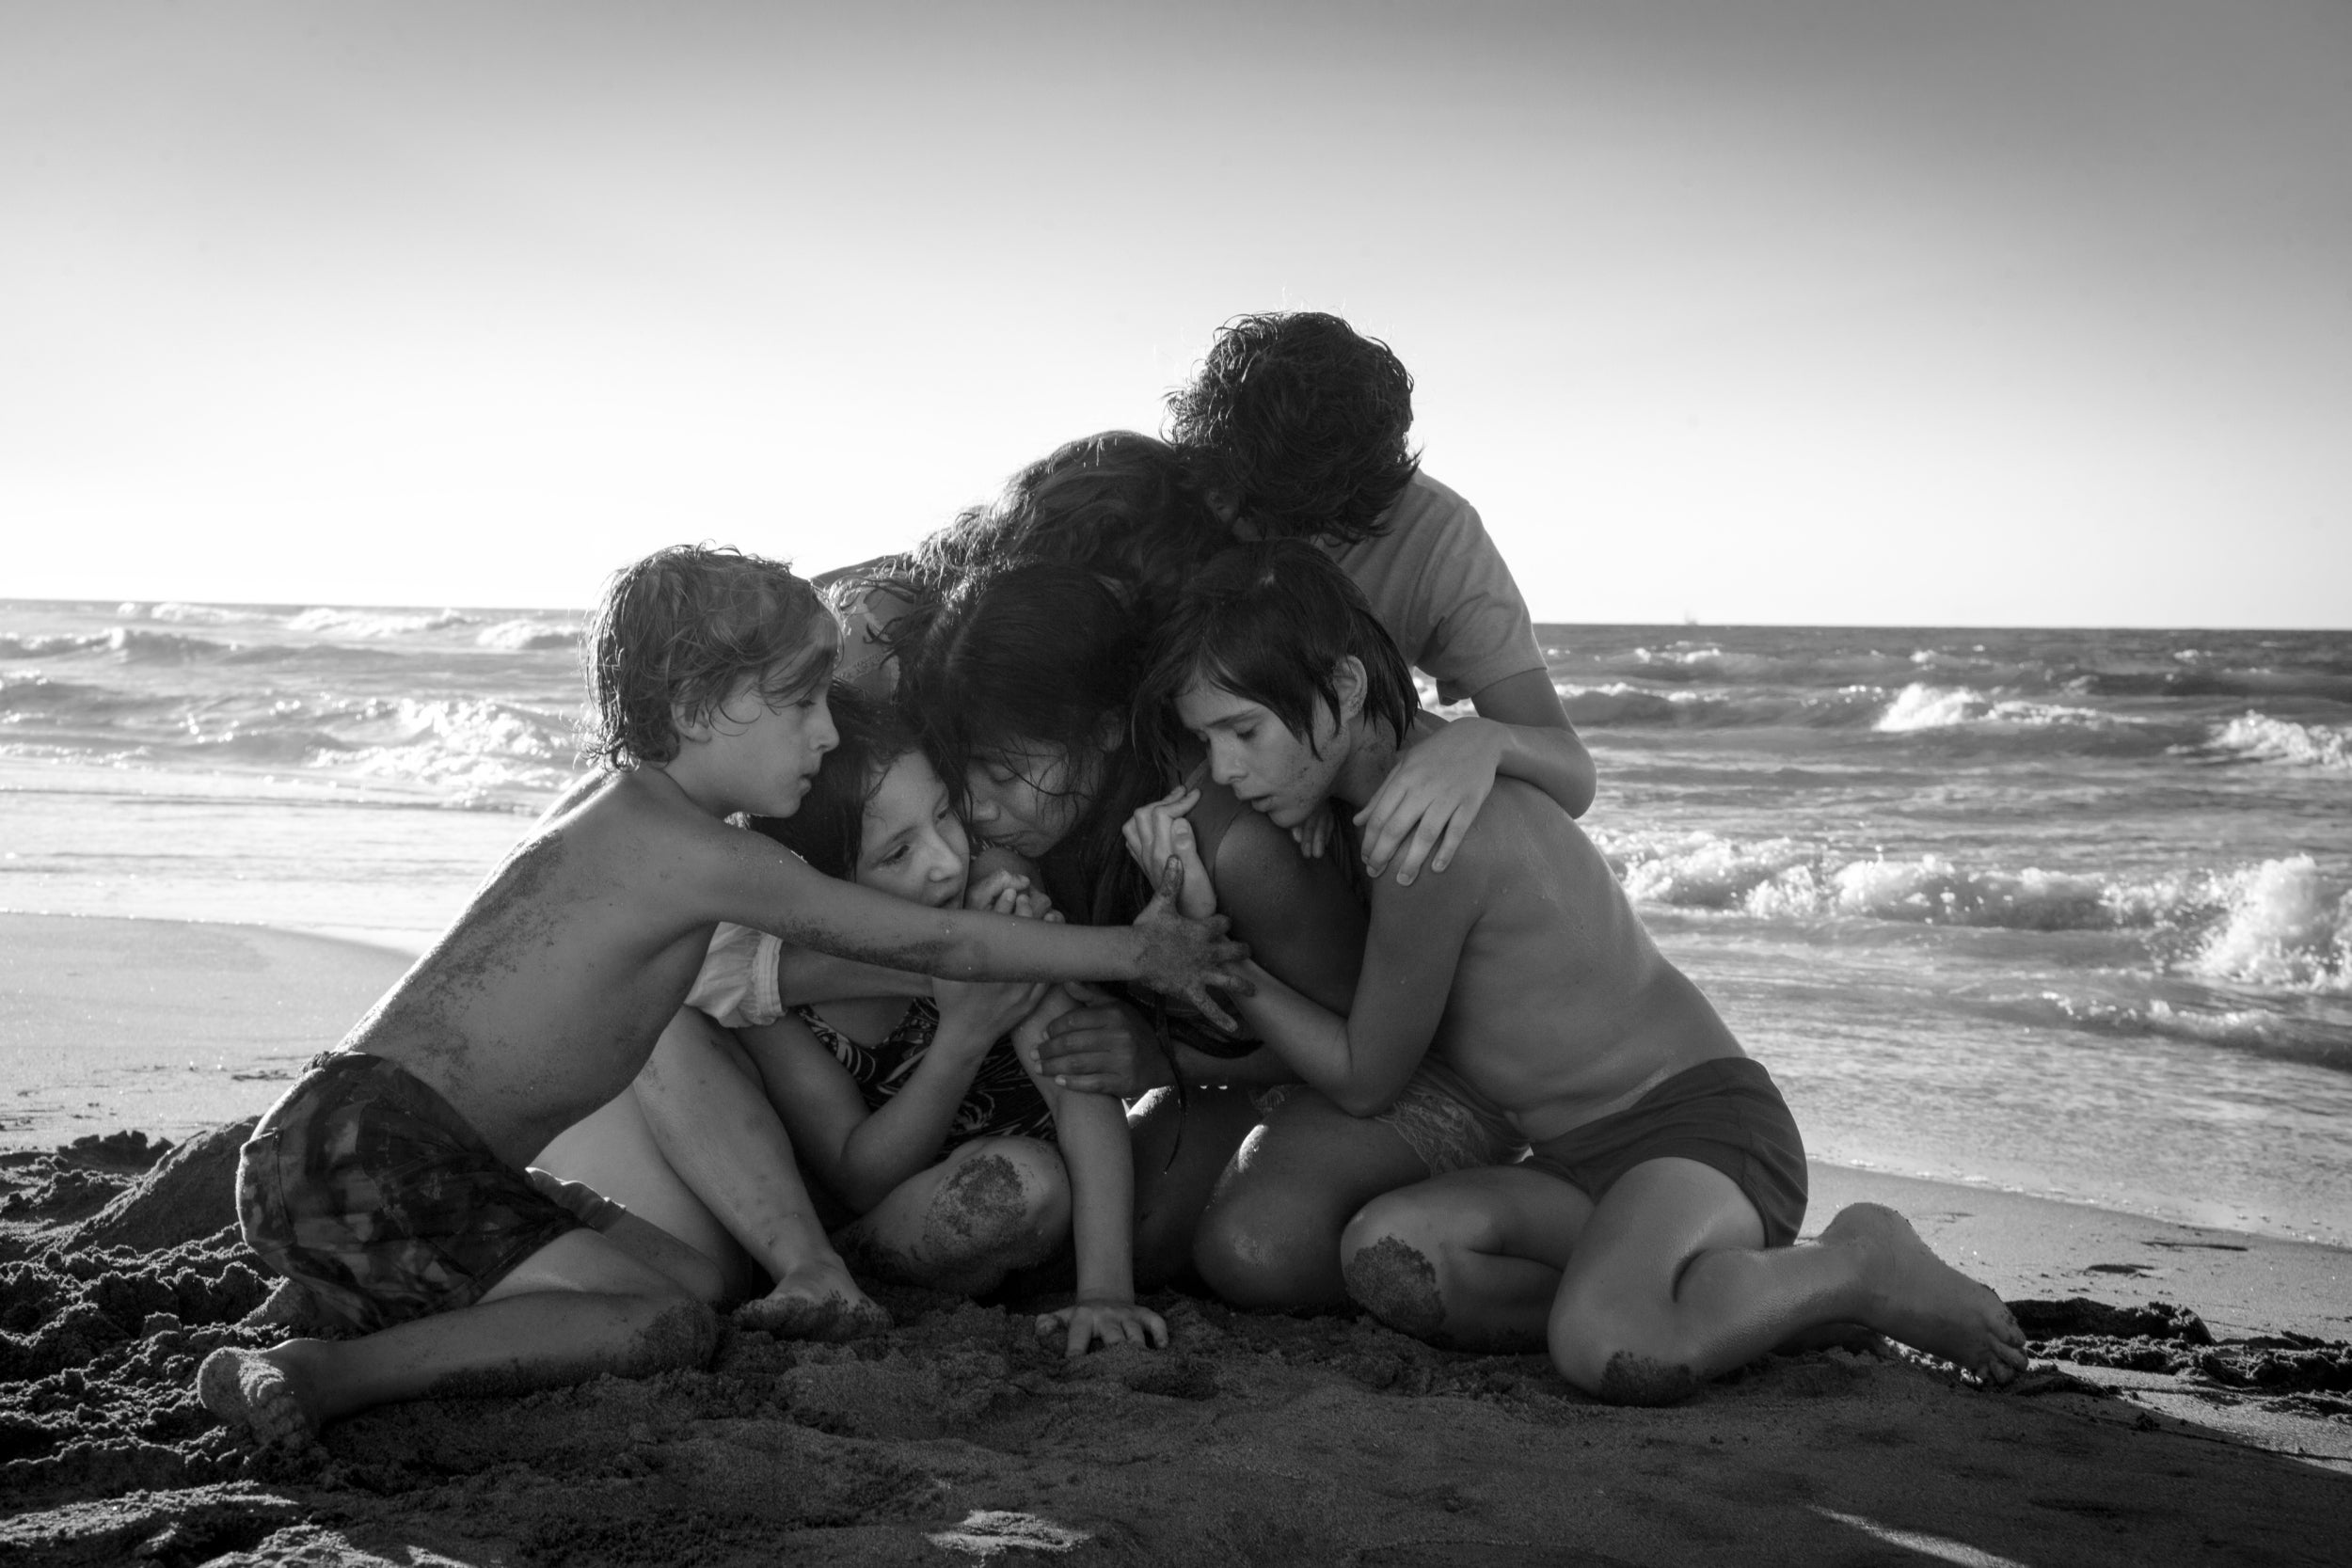 Cuarón’s film ‘Roma’ was nominated for Best Picture at the 2019 Oscars